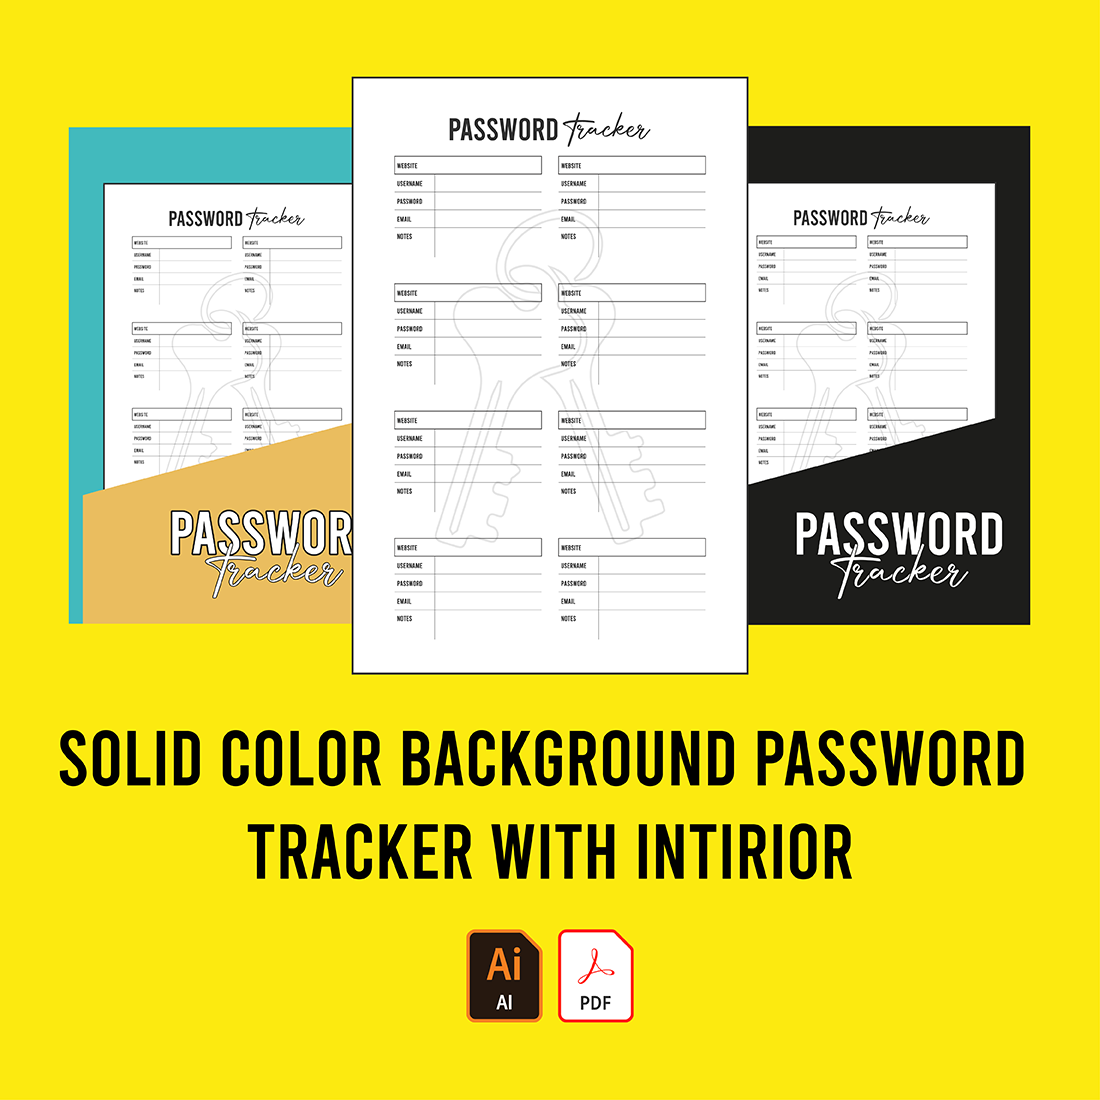 Solid Color Background Password Tracker image preview.